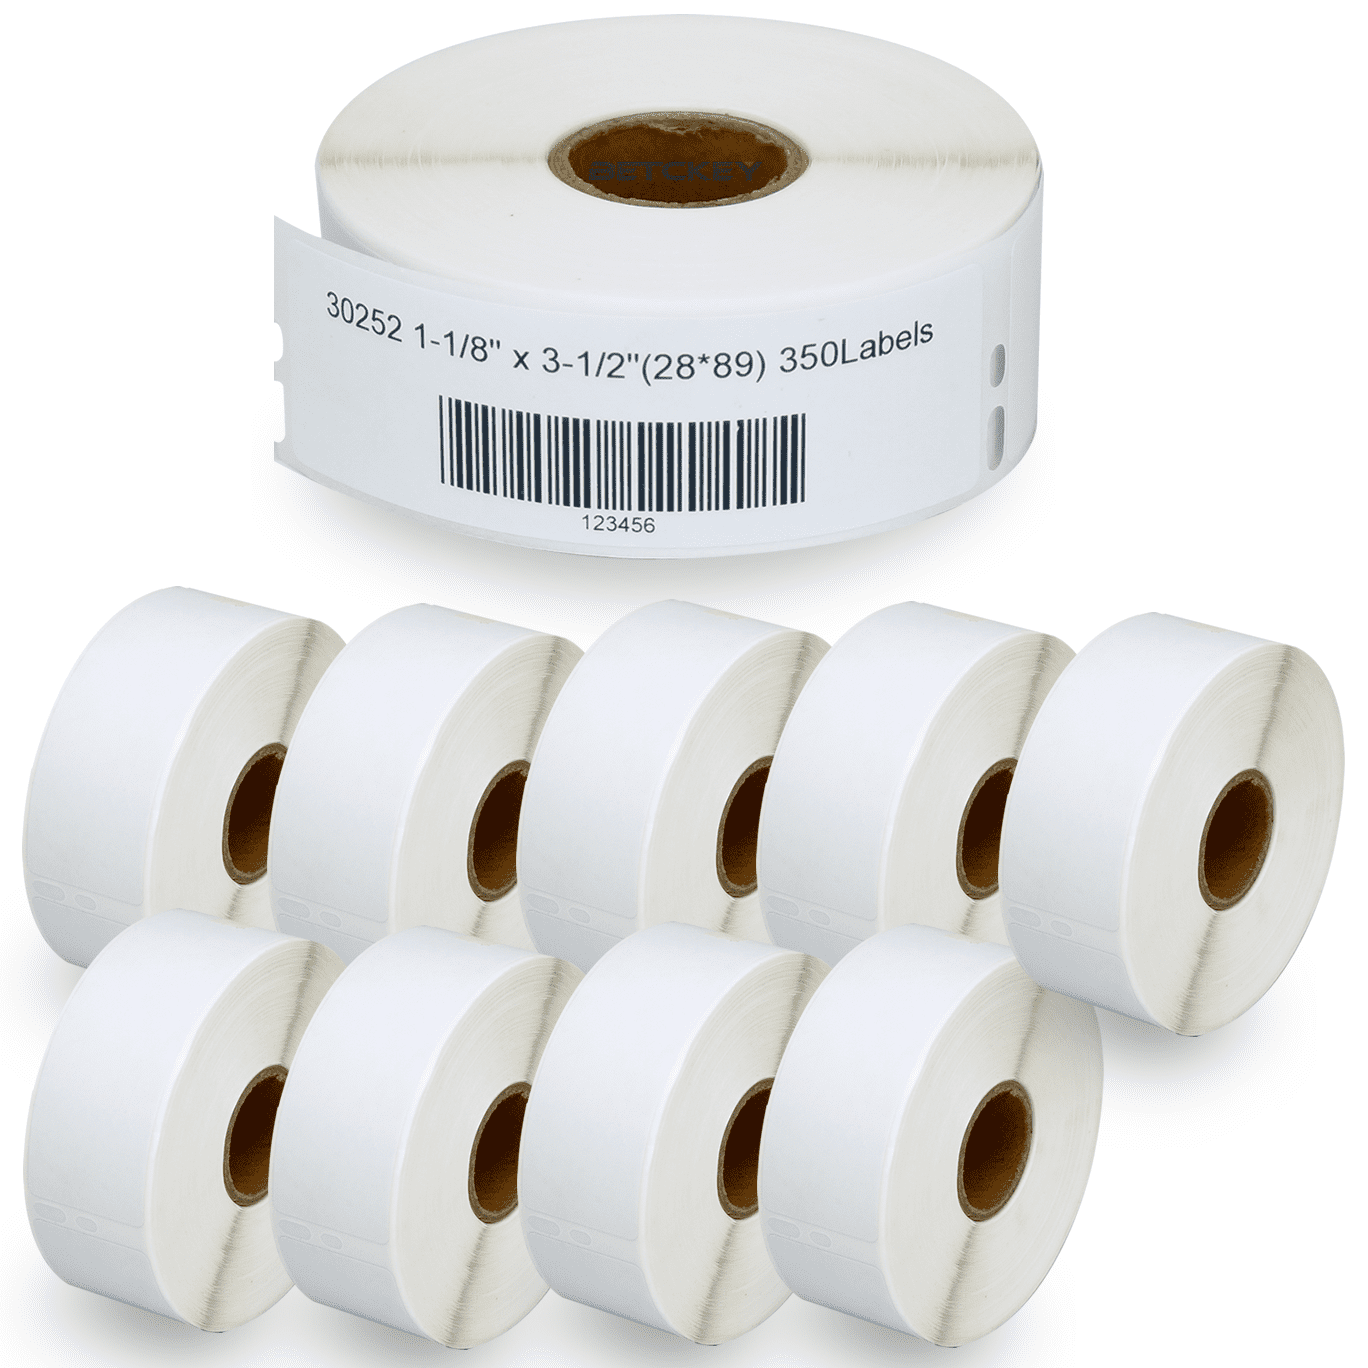 10Rolls Labels in Mini-Cartons For DYMO LabelWriters 30252 CoStar 28mm x 89mm